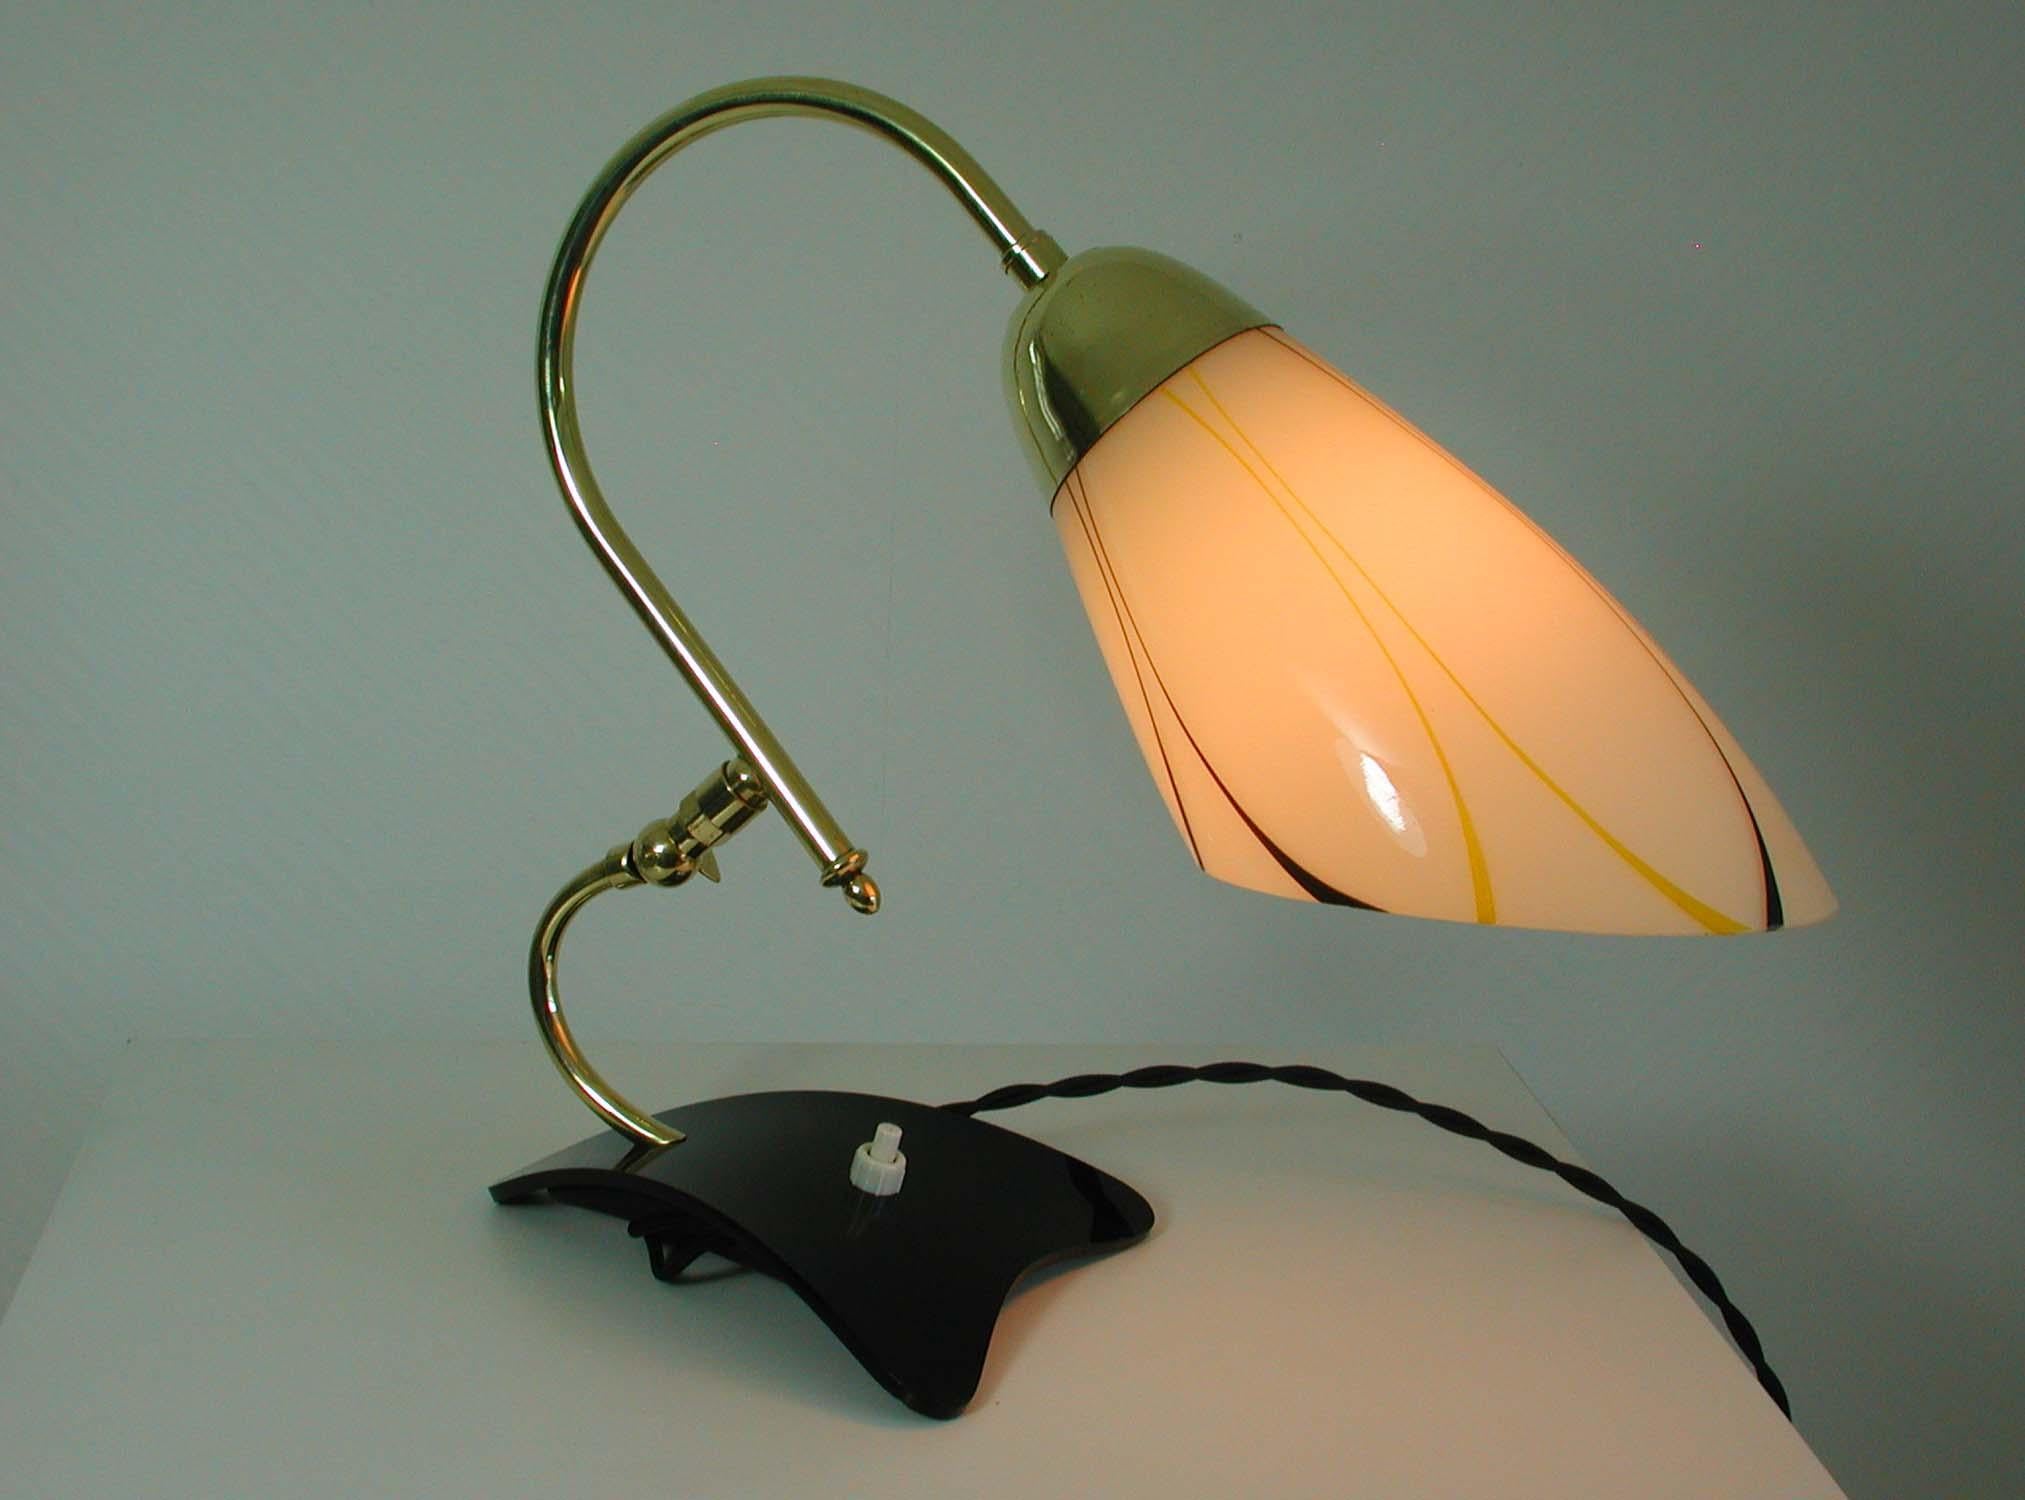 German Midcentury Adjustable Yellow, Black and White Table Lamp, 1950s For Sale 2